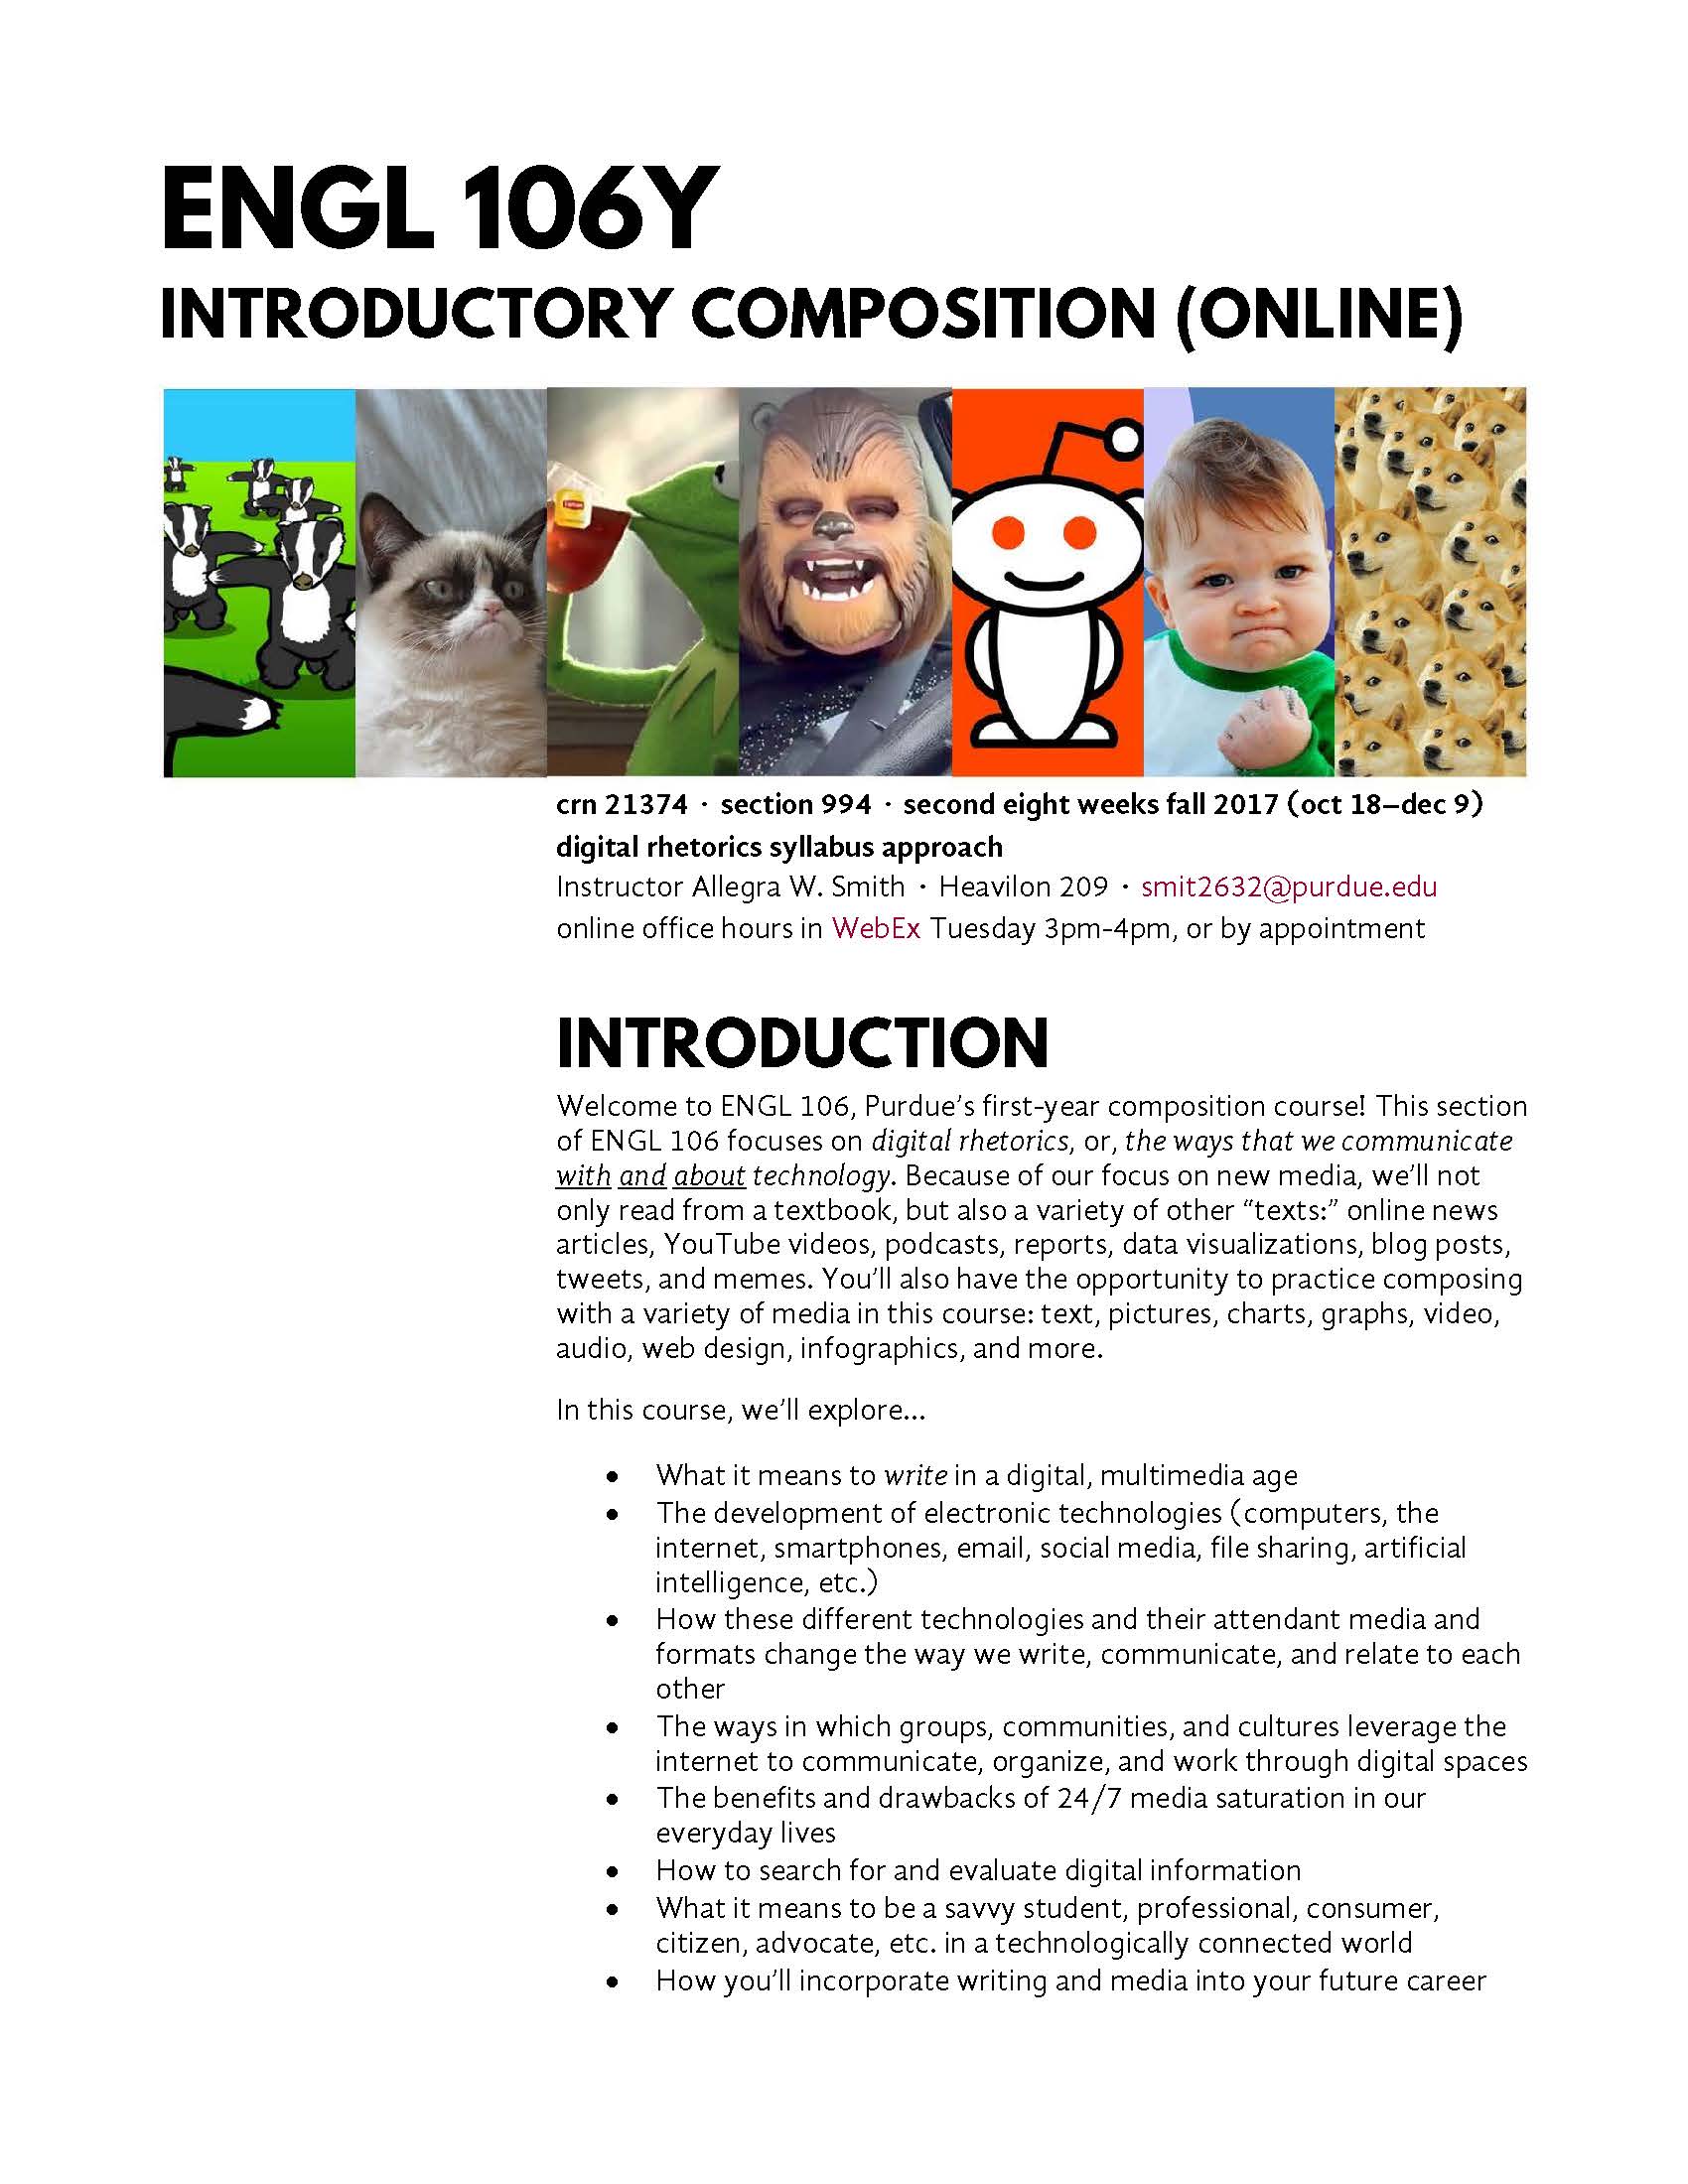 the first page of the ENGL 106Y syllabus, which features images of various memes (badger badger mushroom, grumpy cat, success kid, doge, etc.) to represent the course theme of "digital rhetorics"